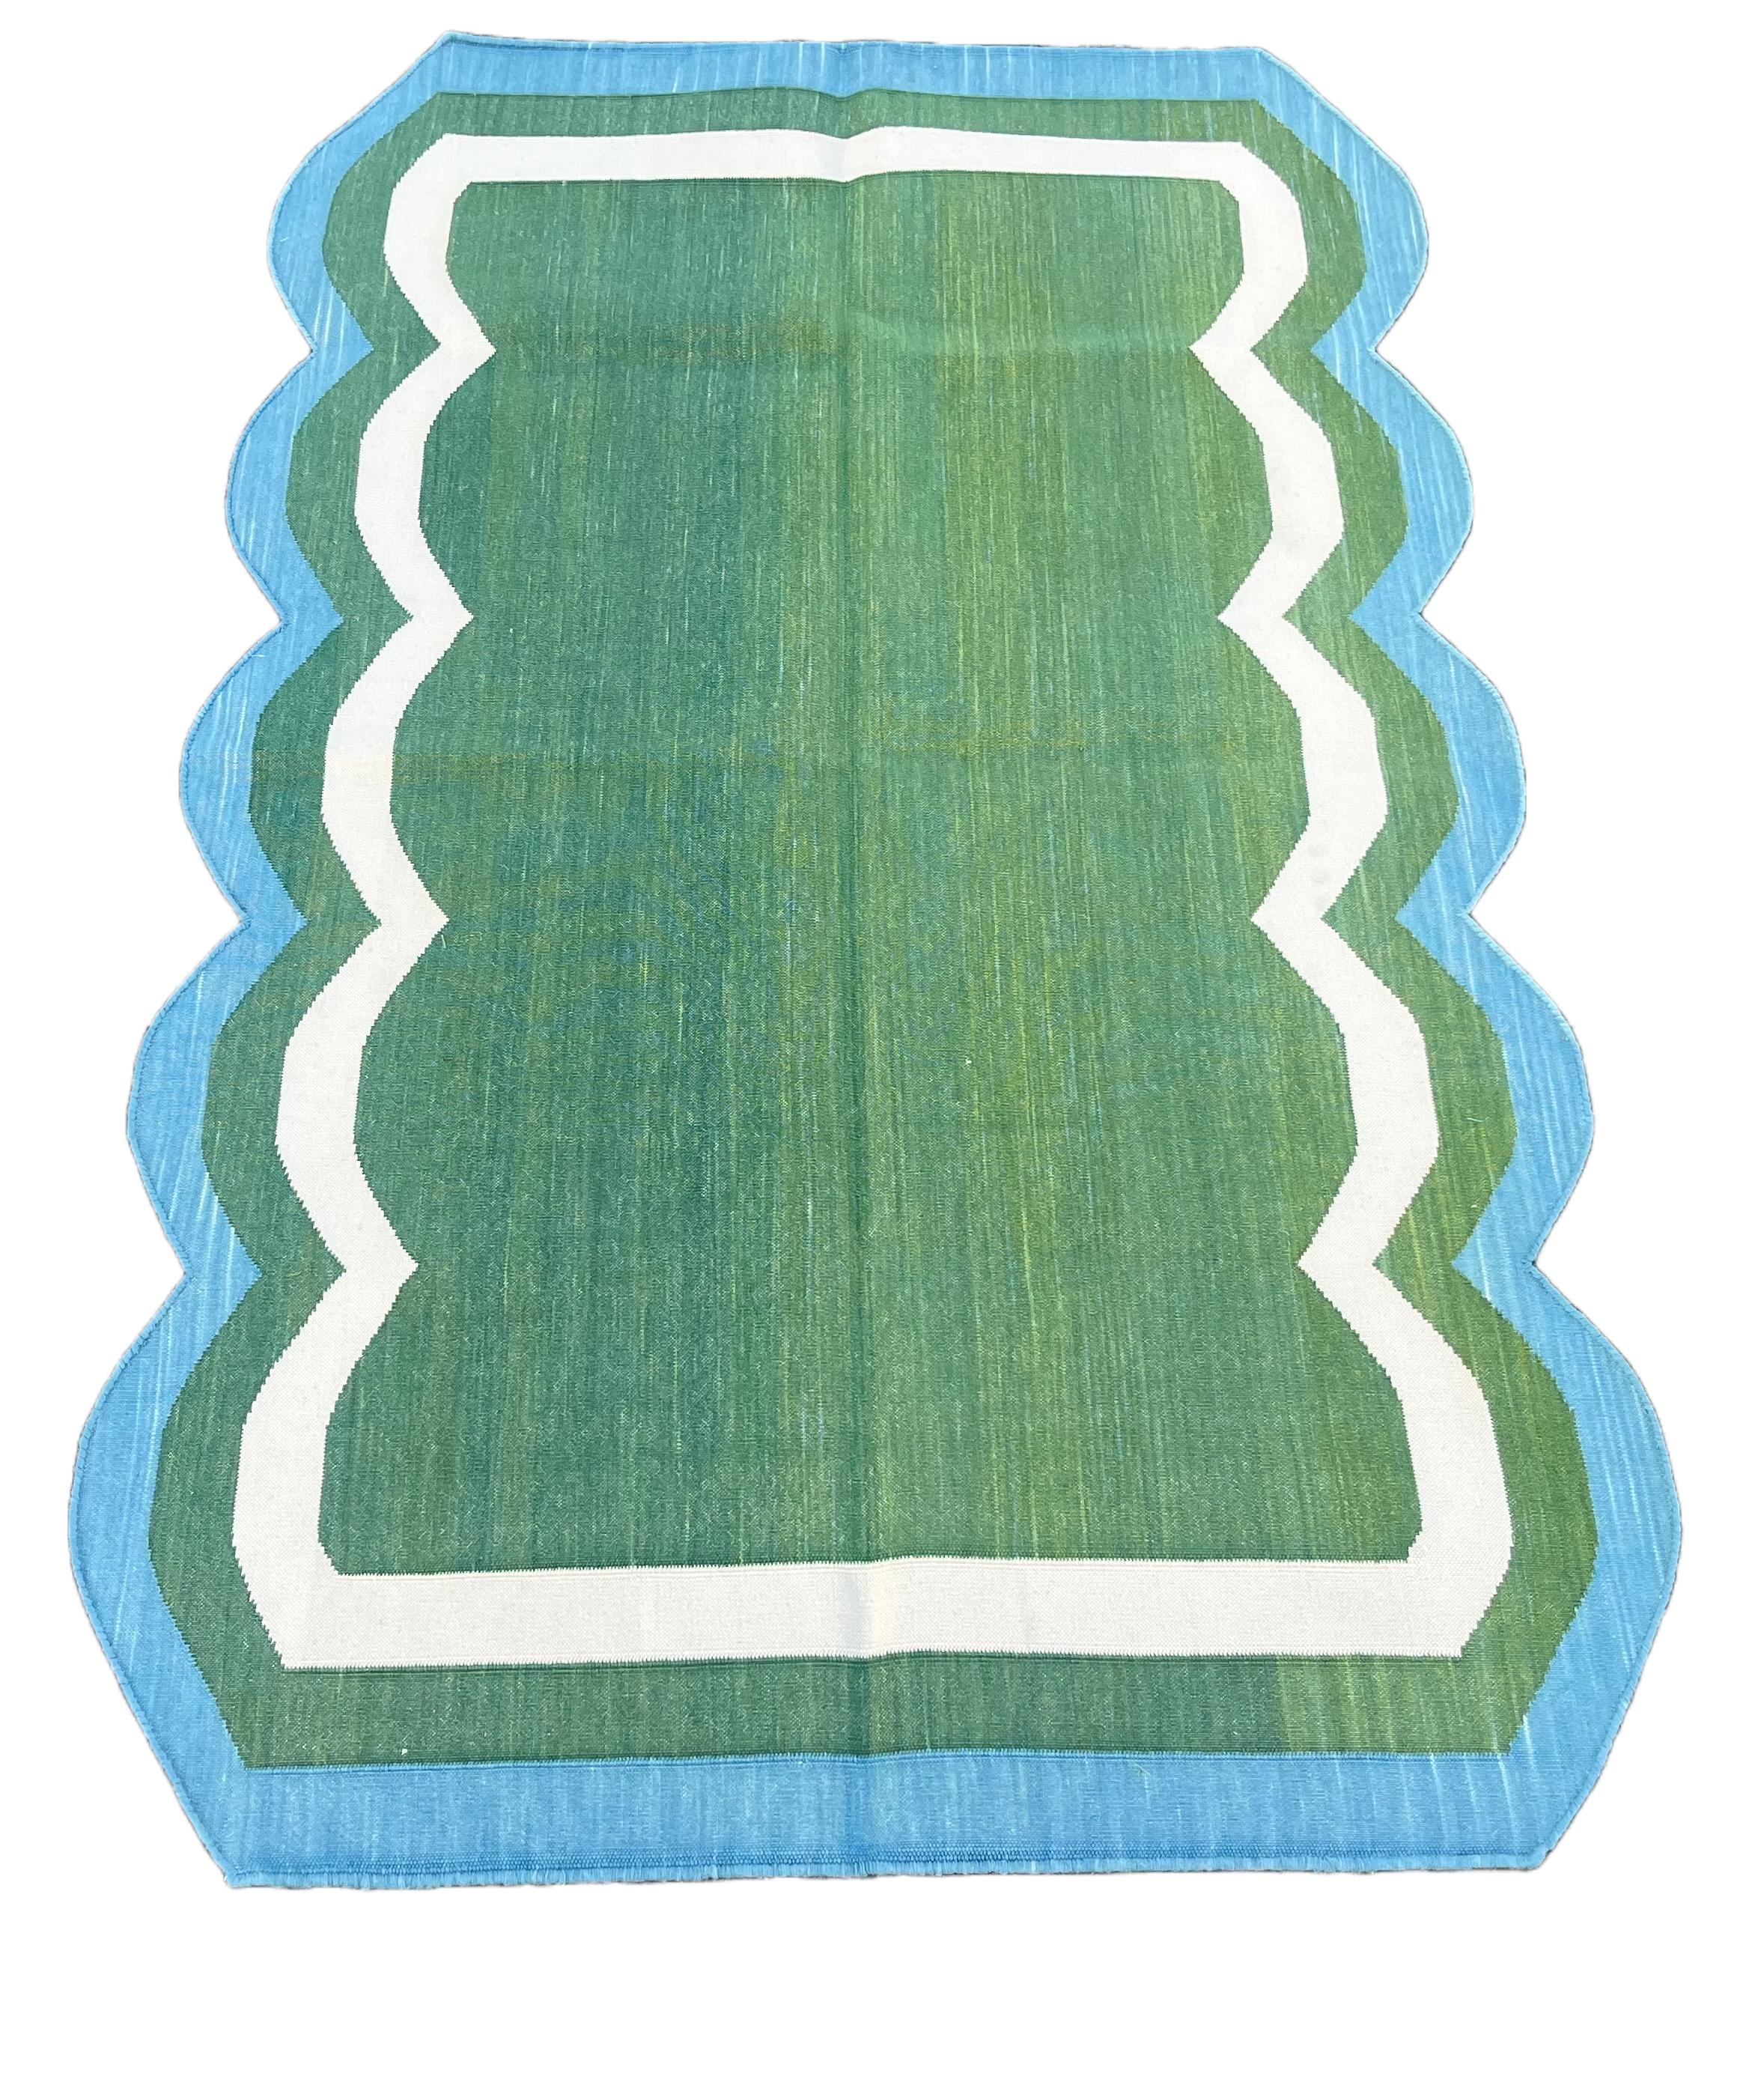 Handmade Cotton Area Flat Weave Rug, 3x5 Green And Blue Scalloped Kilim Dhurrie In New Condition For Sale In Jaipur, IN